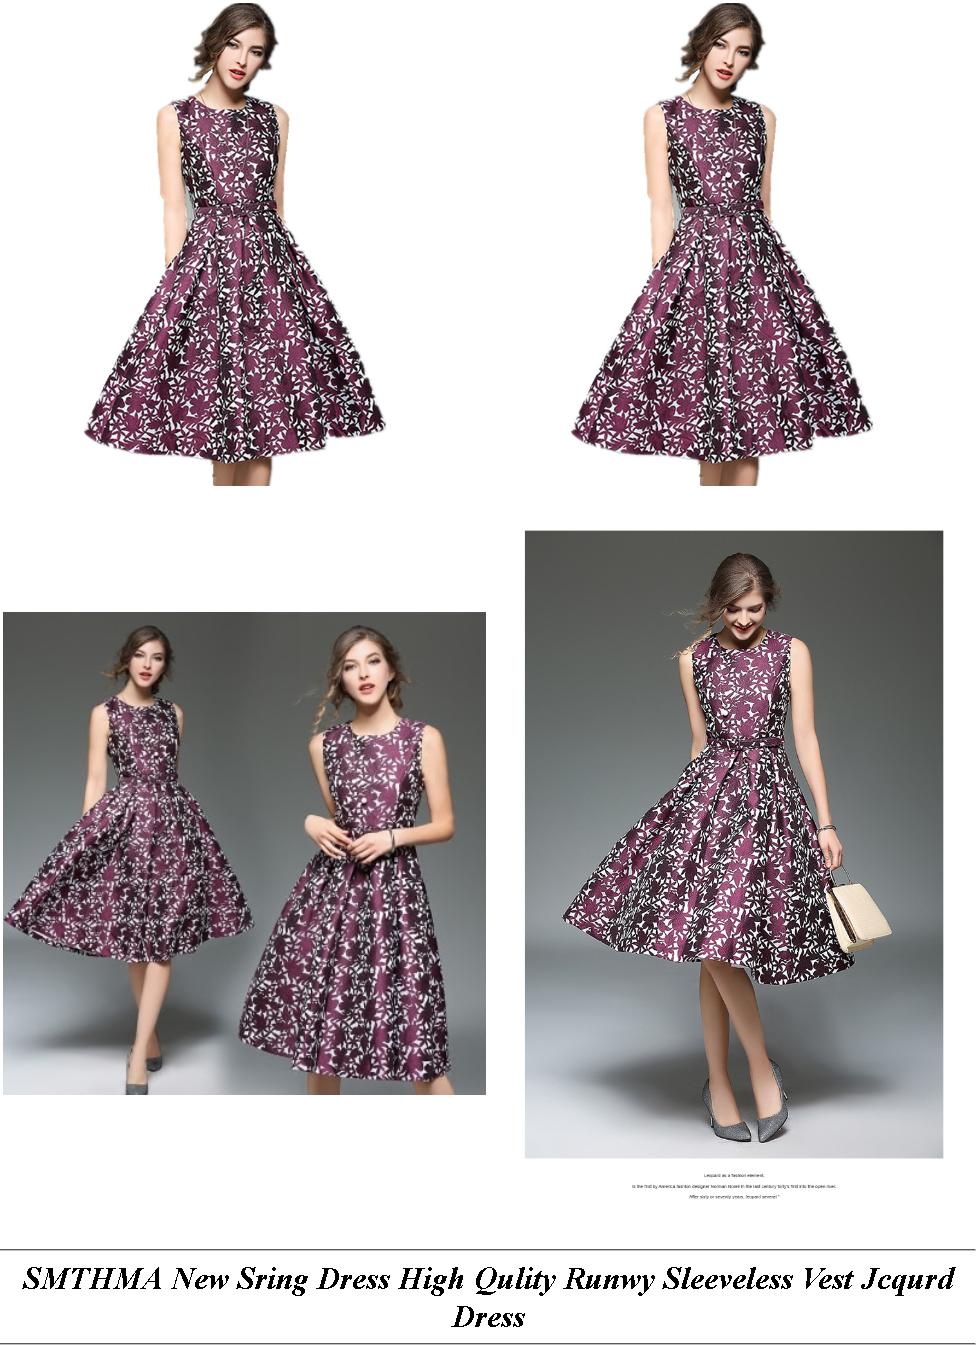 Petite Evening Dresses Nordstrom - Womens Ankle Oots Sale Uk - Summer Lace Dresses Canada